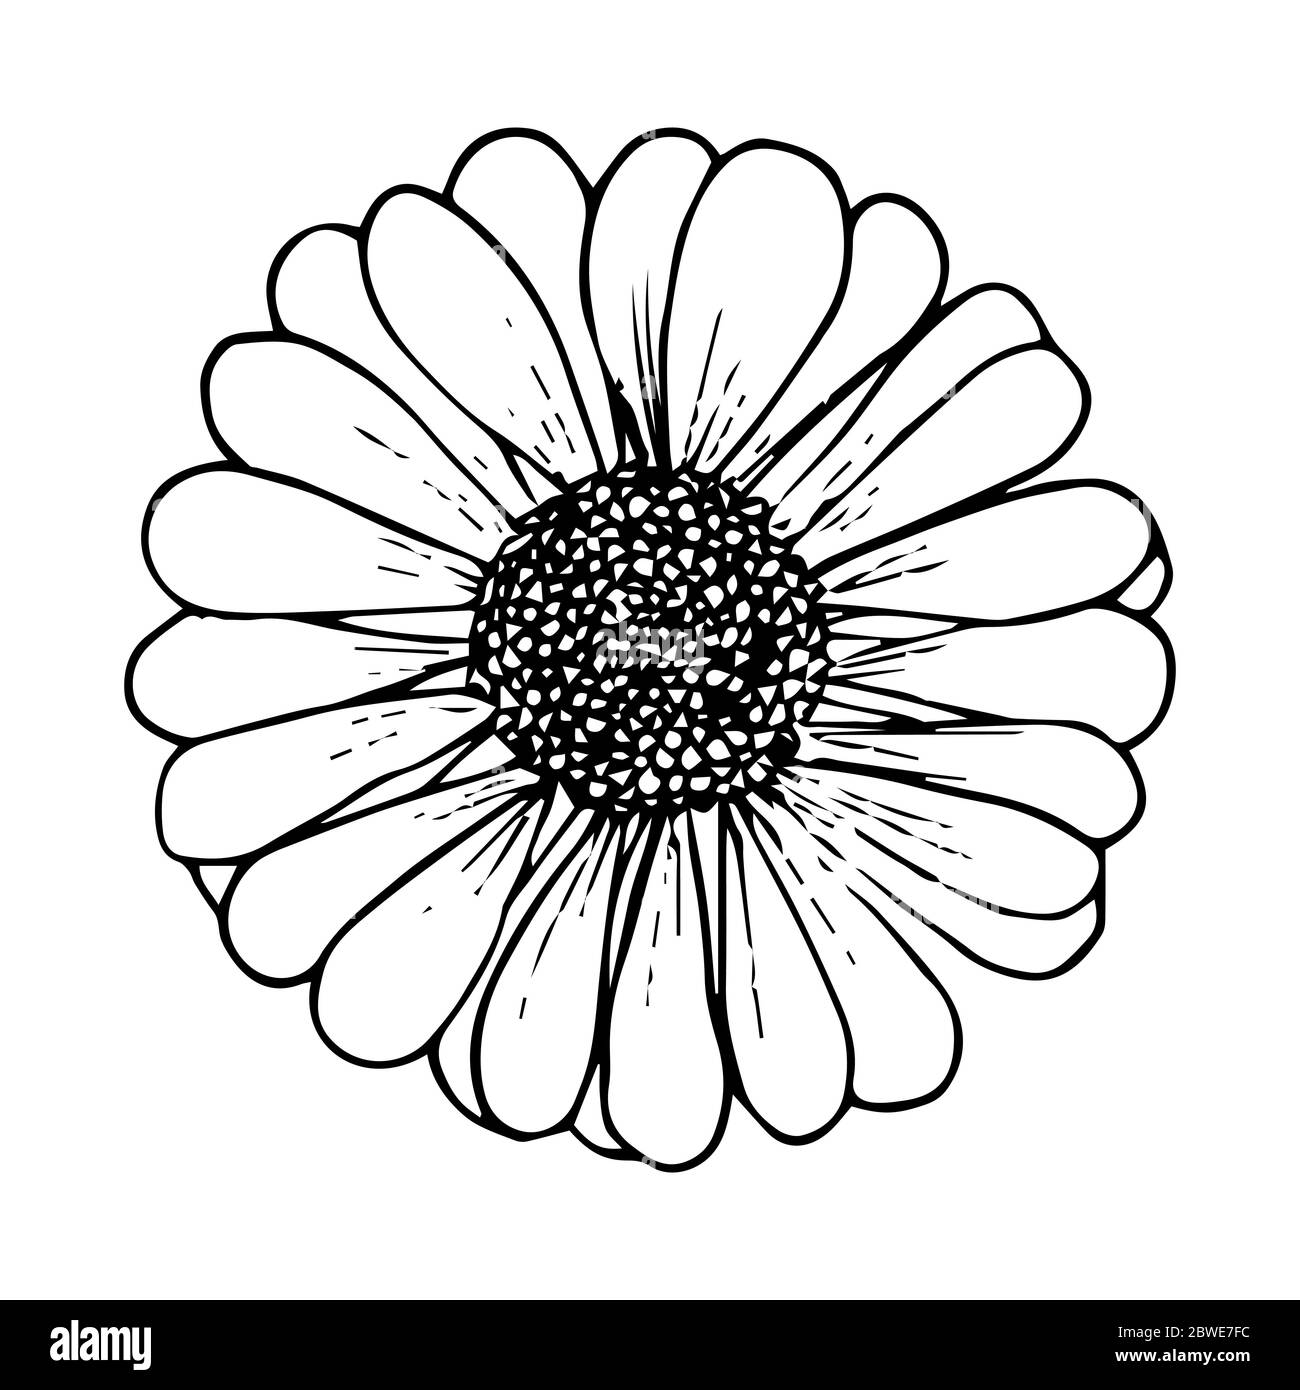 Download this stock vector: Daisy flower black outline drawing isolated on ...